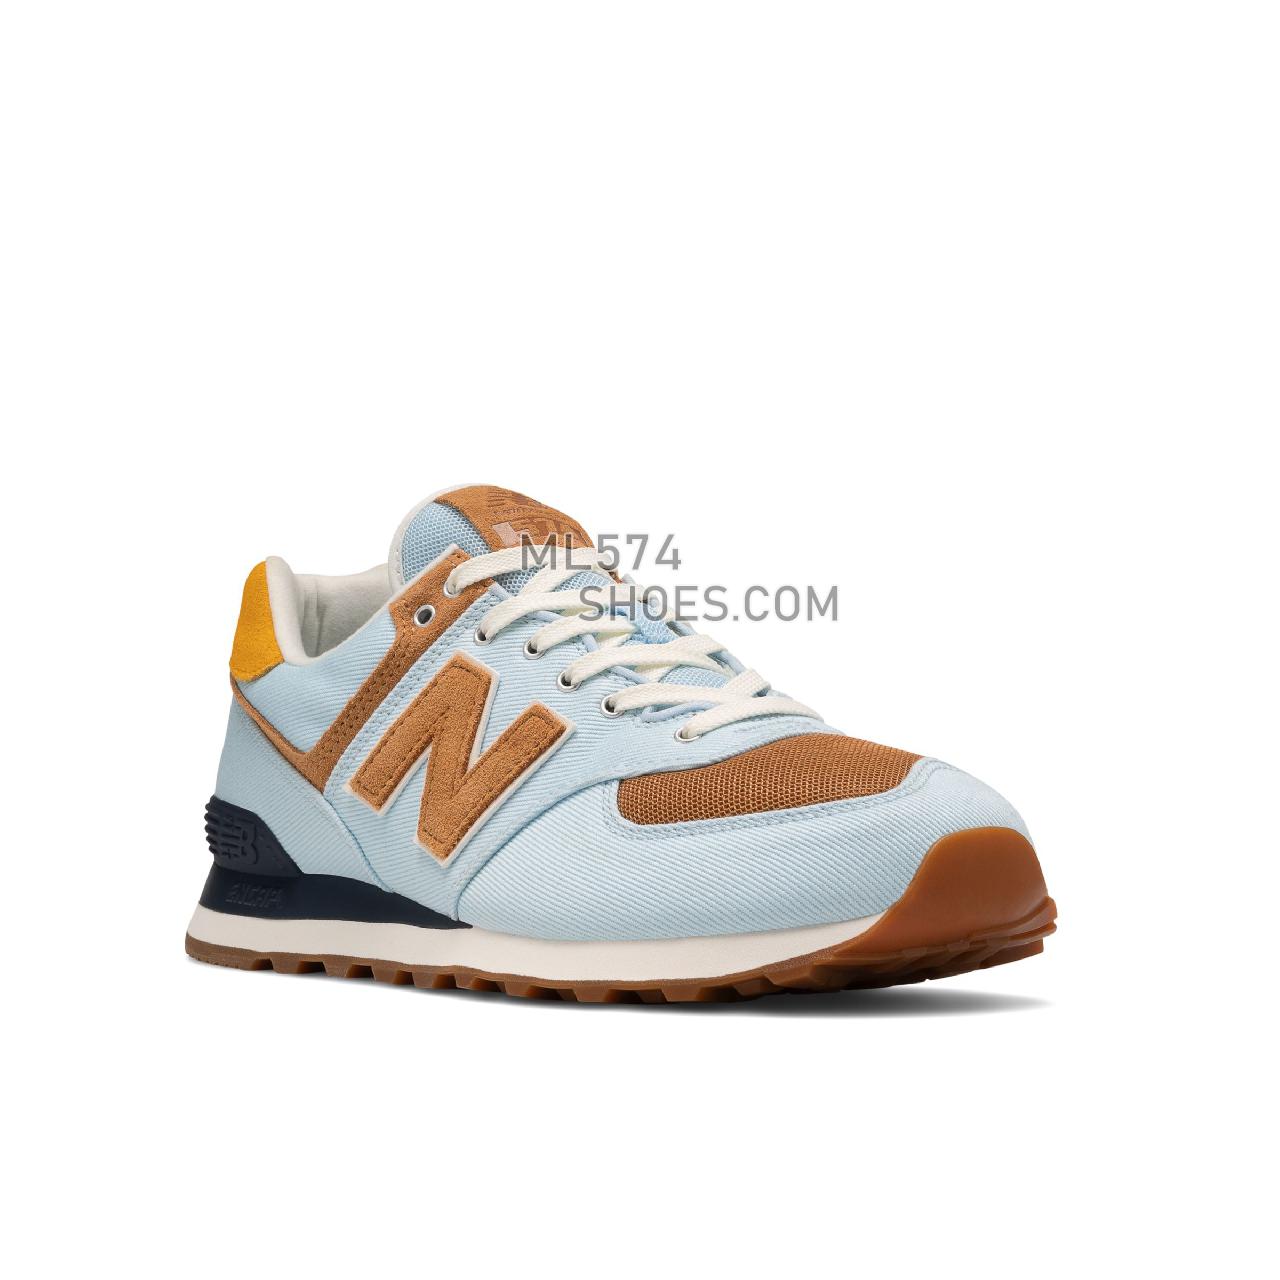 New Balance 574v2 Denim - Men's Classic Sneakers - Uv Glo with Faded Workwear - ML574DS2